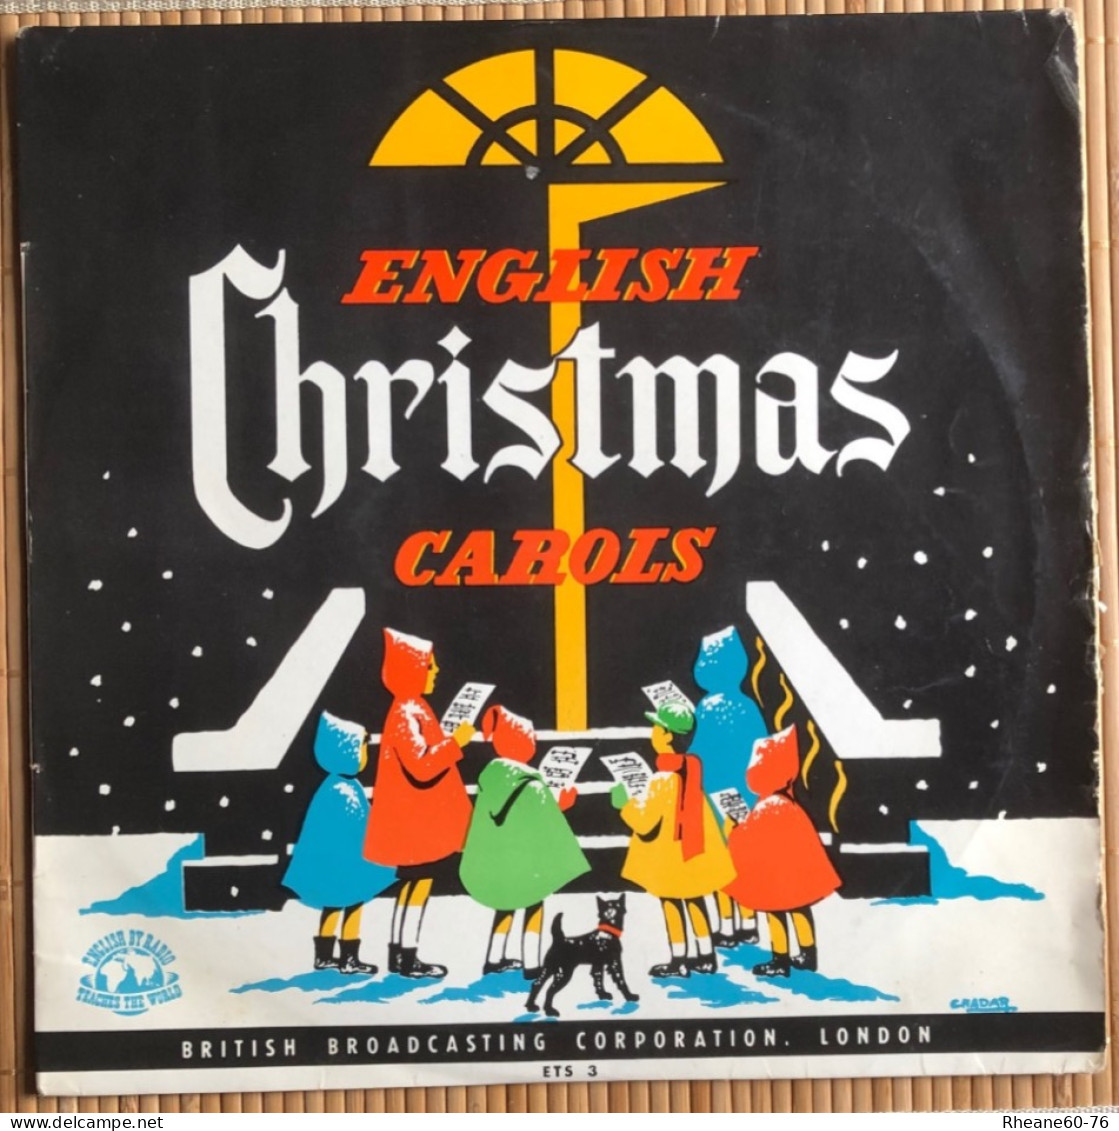 33T English Christmas Carols - British Broadcasting Corporation - ETS 3 ELY 80 05 Choir Of King's College Cambridge Univ - Weihnachtslieder